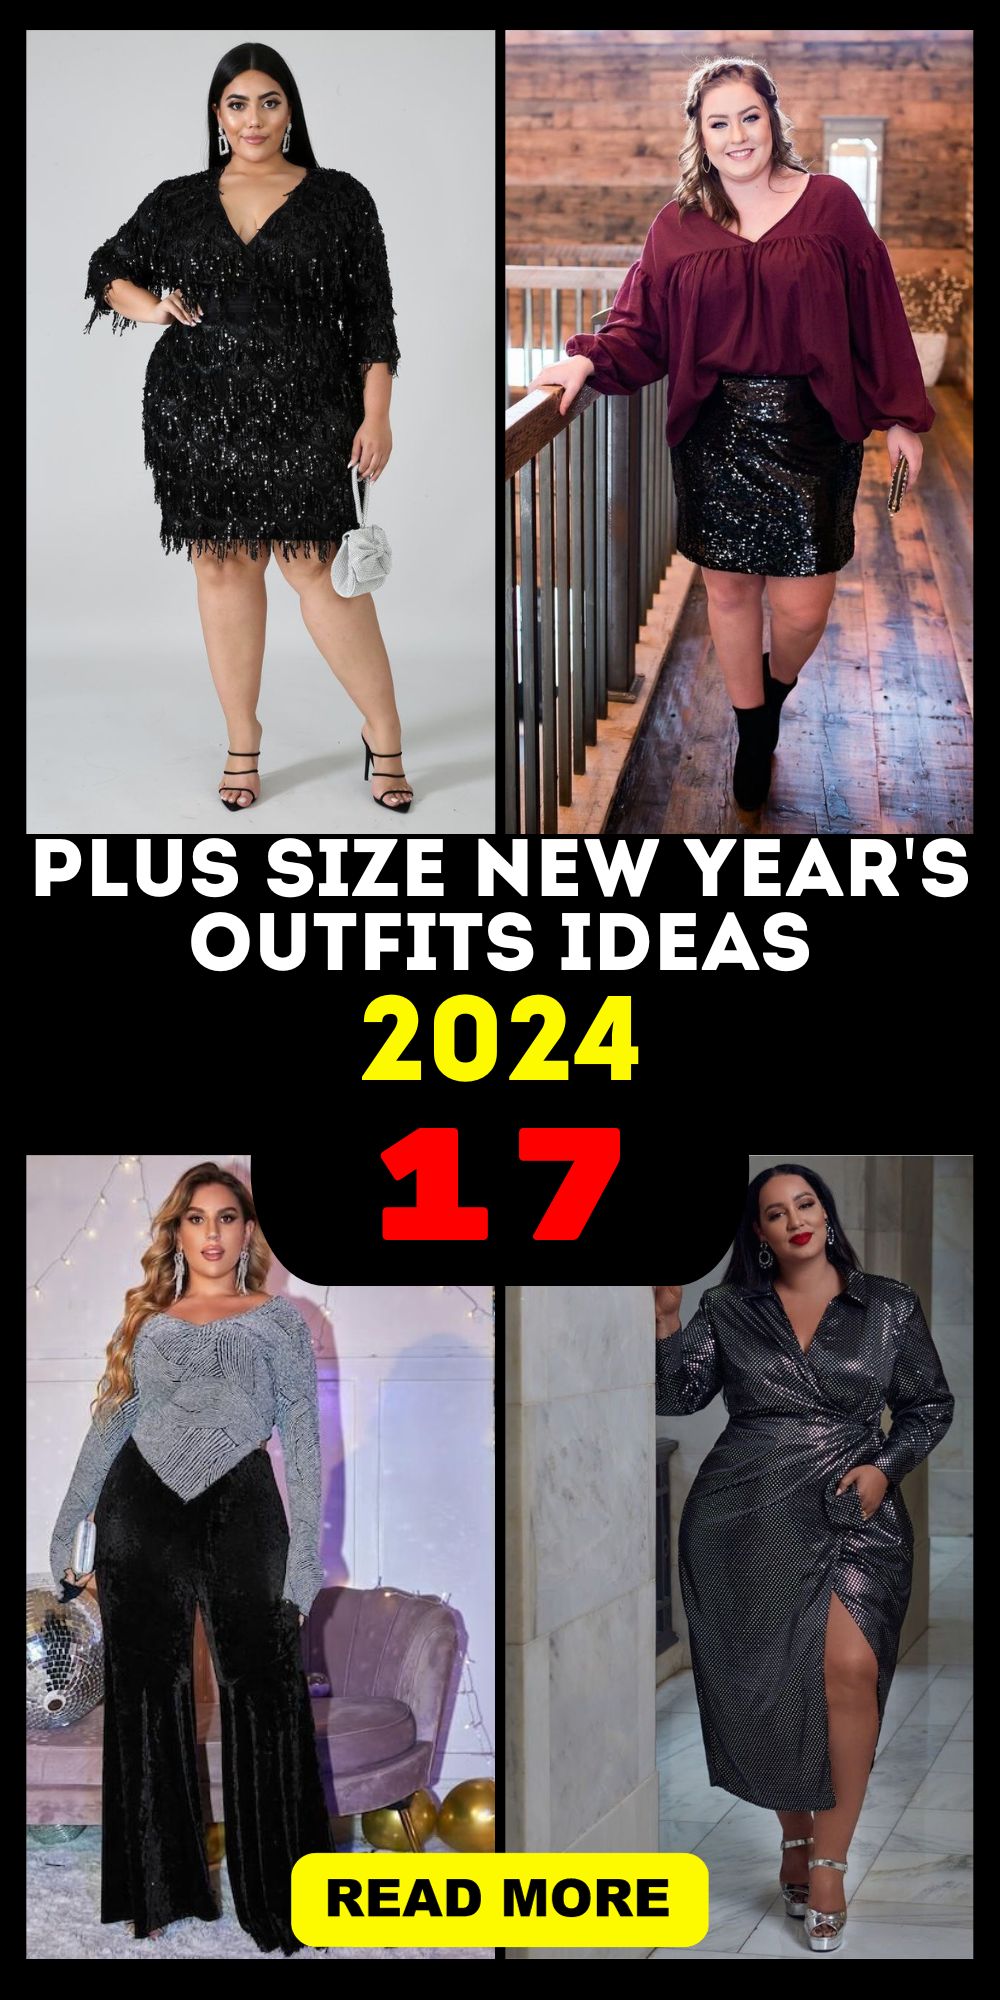 Ring in 2024 with Sparkling Plus Size New Year's Outfits & Ideas